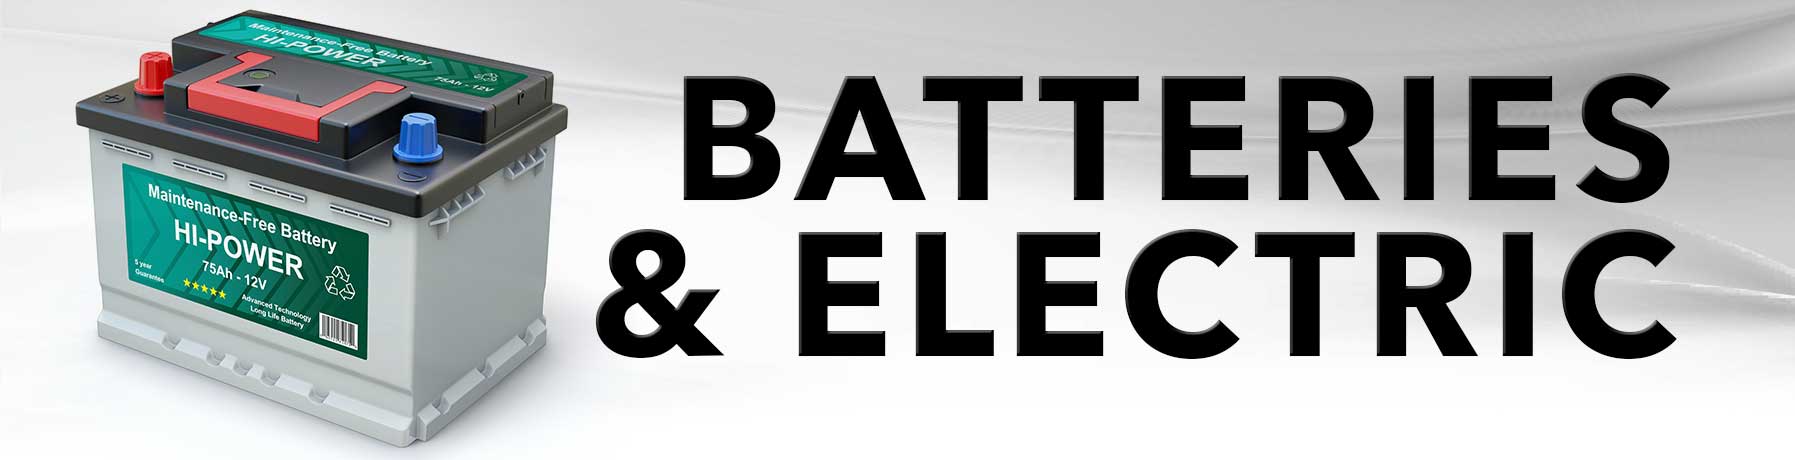 Batteries and Electric maintenance banner image with picture of battery